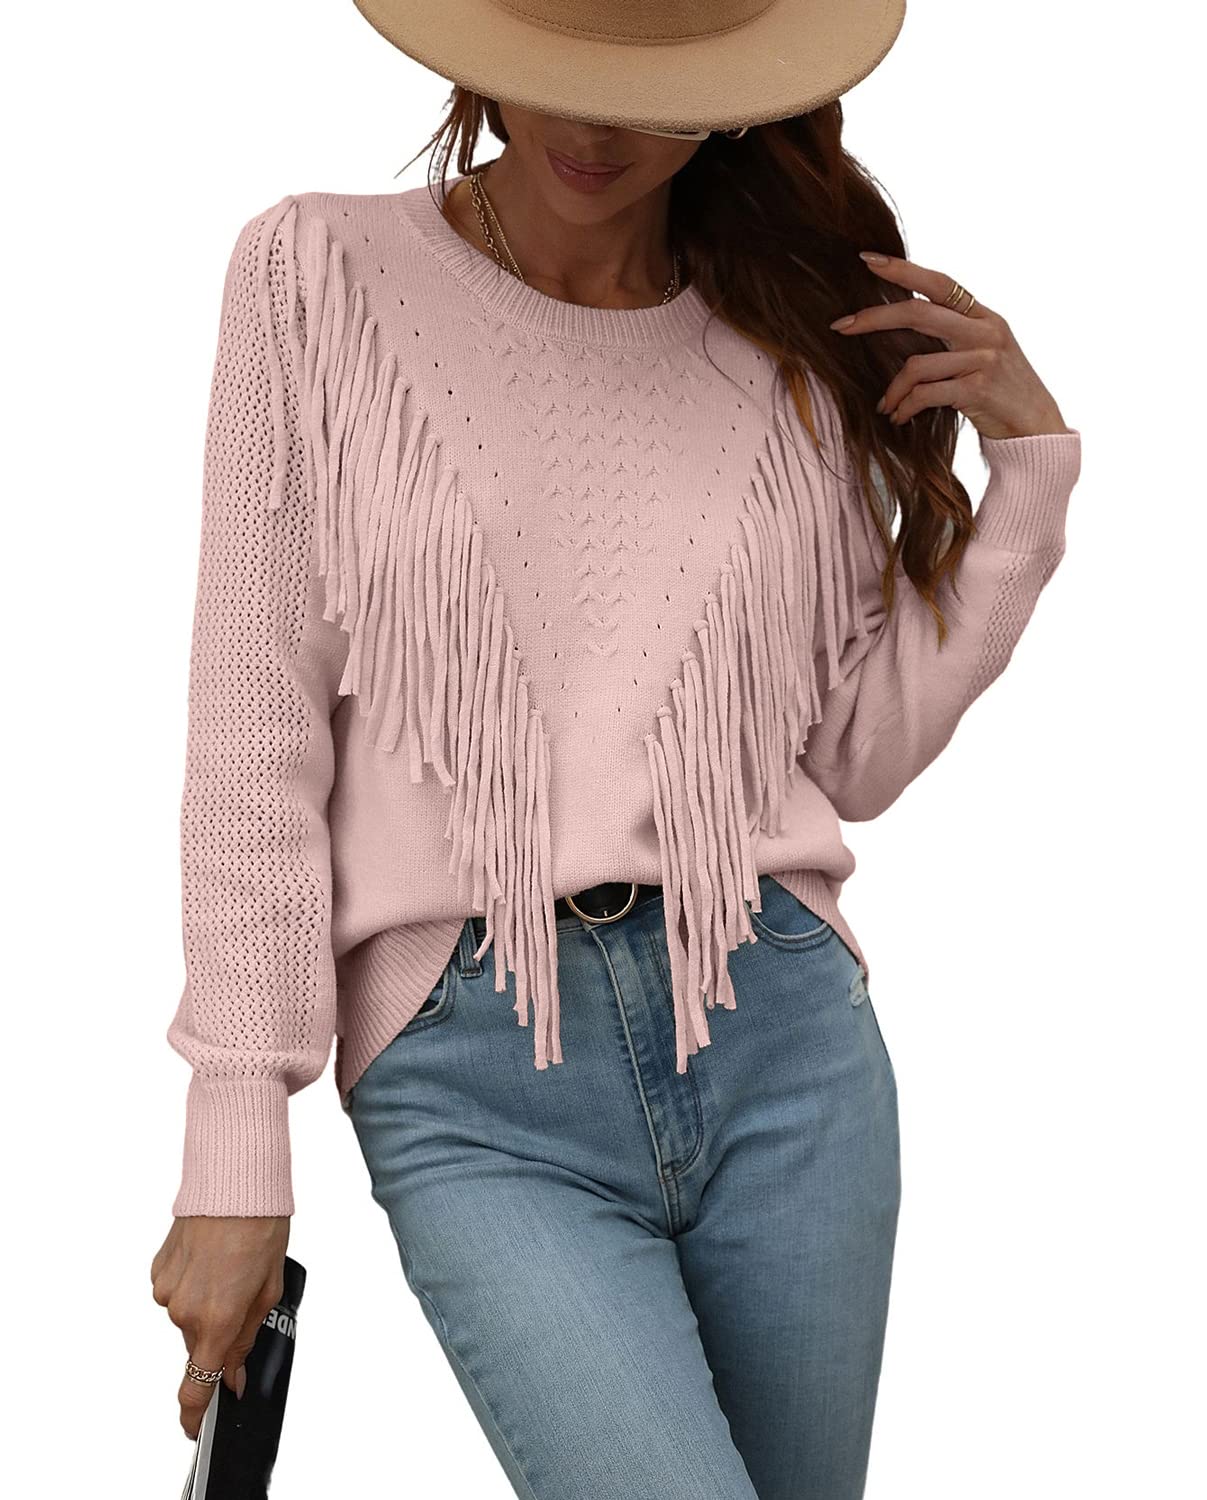 Chouyatou Women's Casual Crewneck Fringe Tassel Knitted Pullover Sweater Jumper Tops